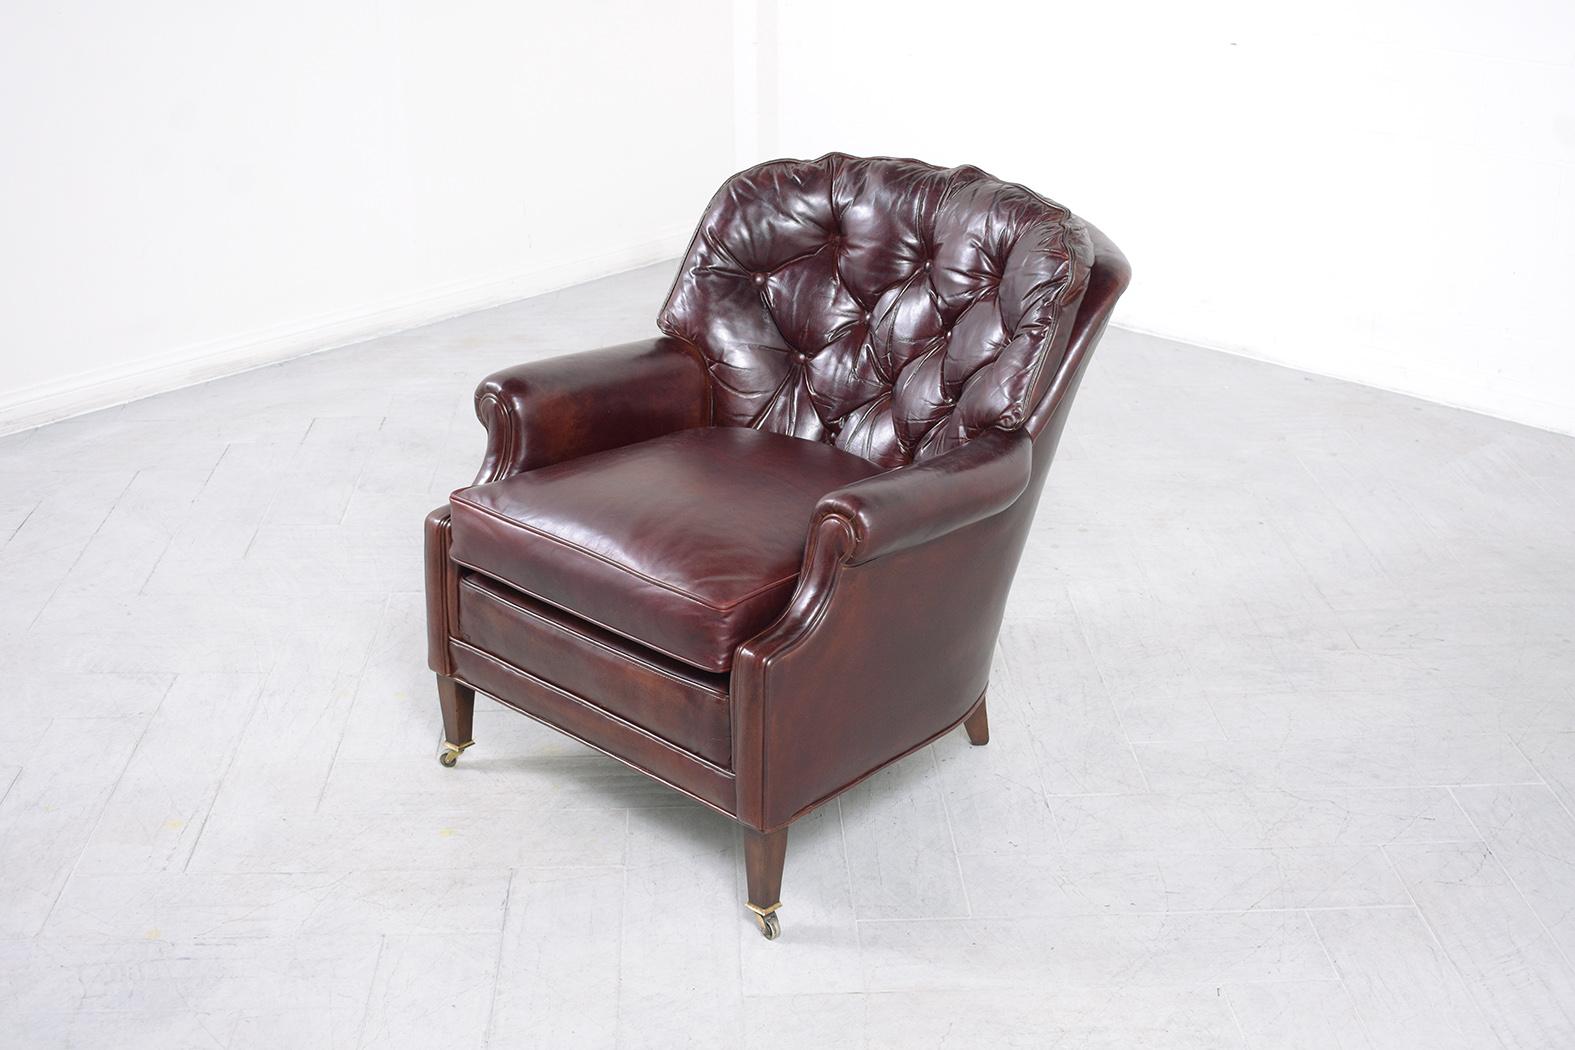 Wood Antique English Chesterfield Lounge Chair For Sale